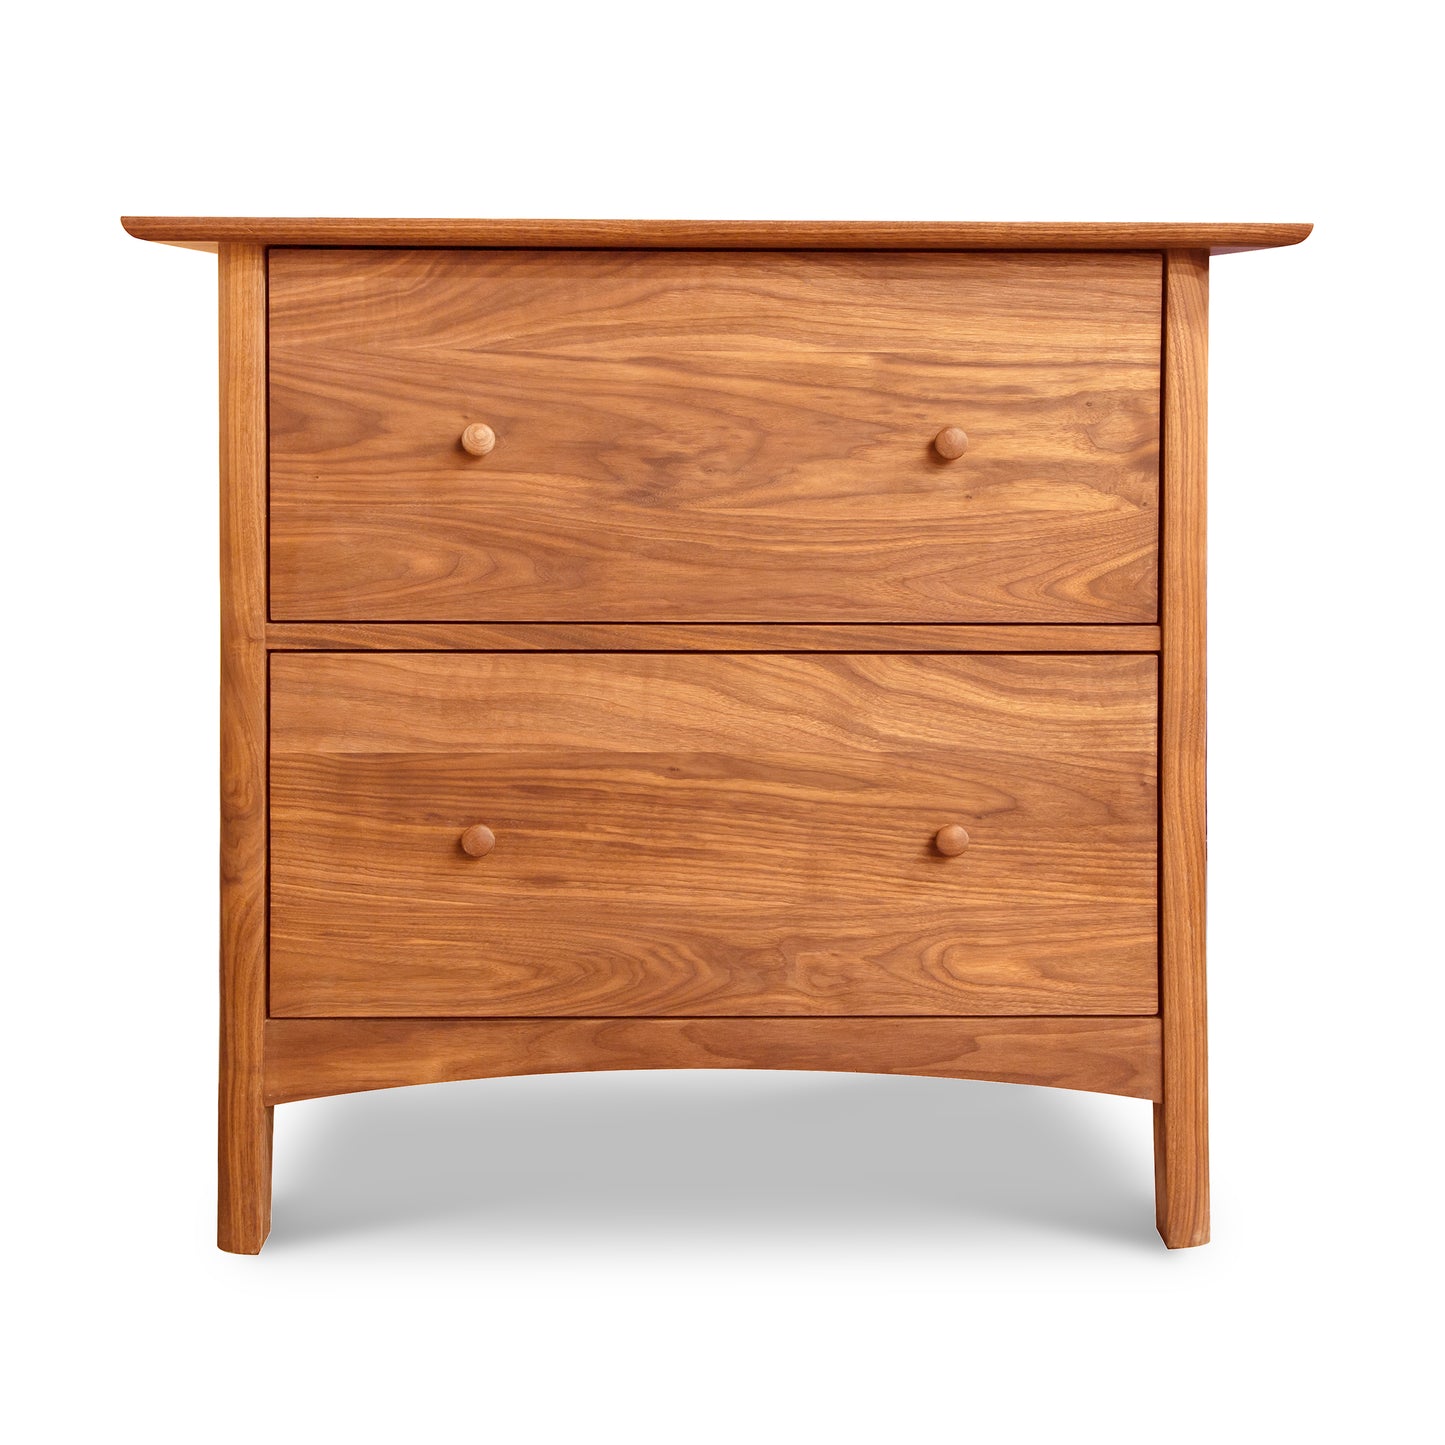 A Vermont Furniture Designs Heartwood Shaker 2-Drawer Lateral File Cabinet isolated on a white background.